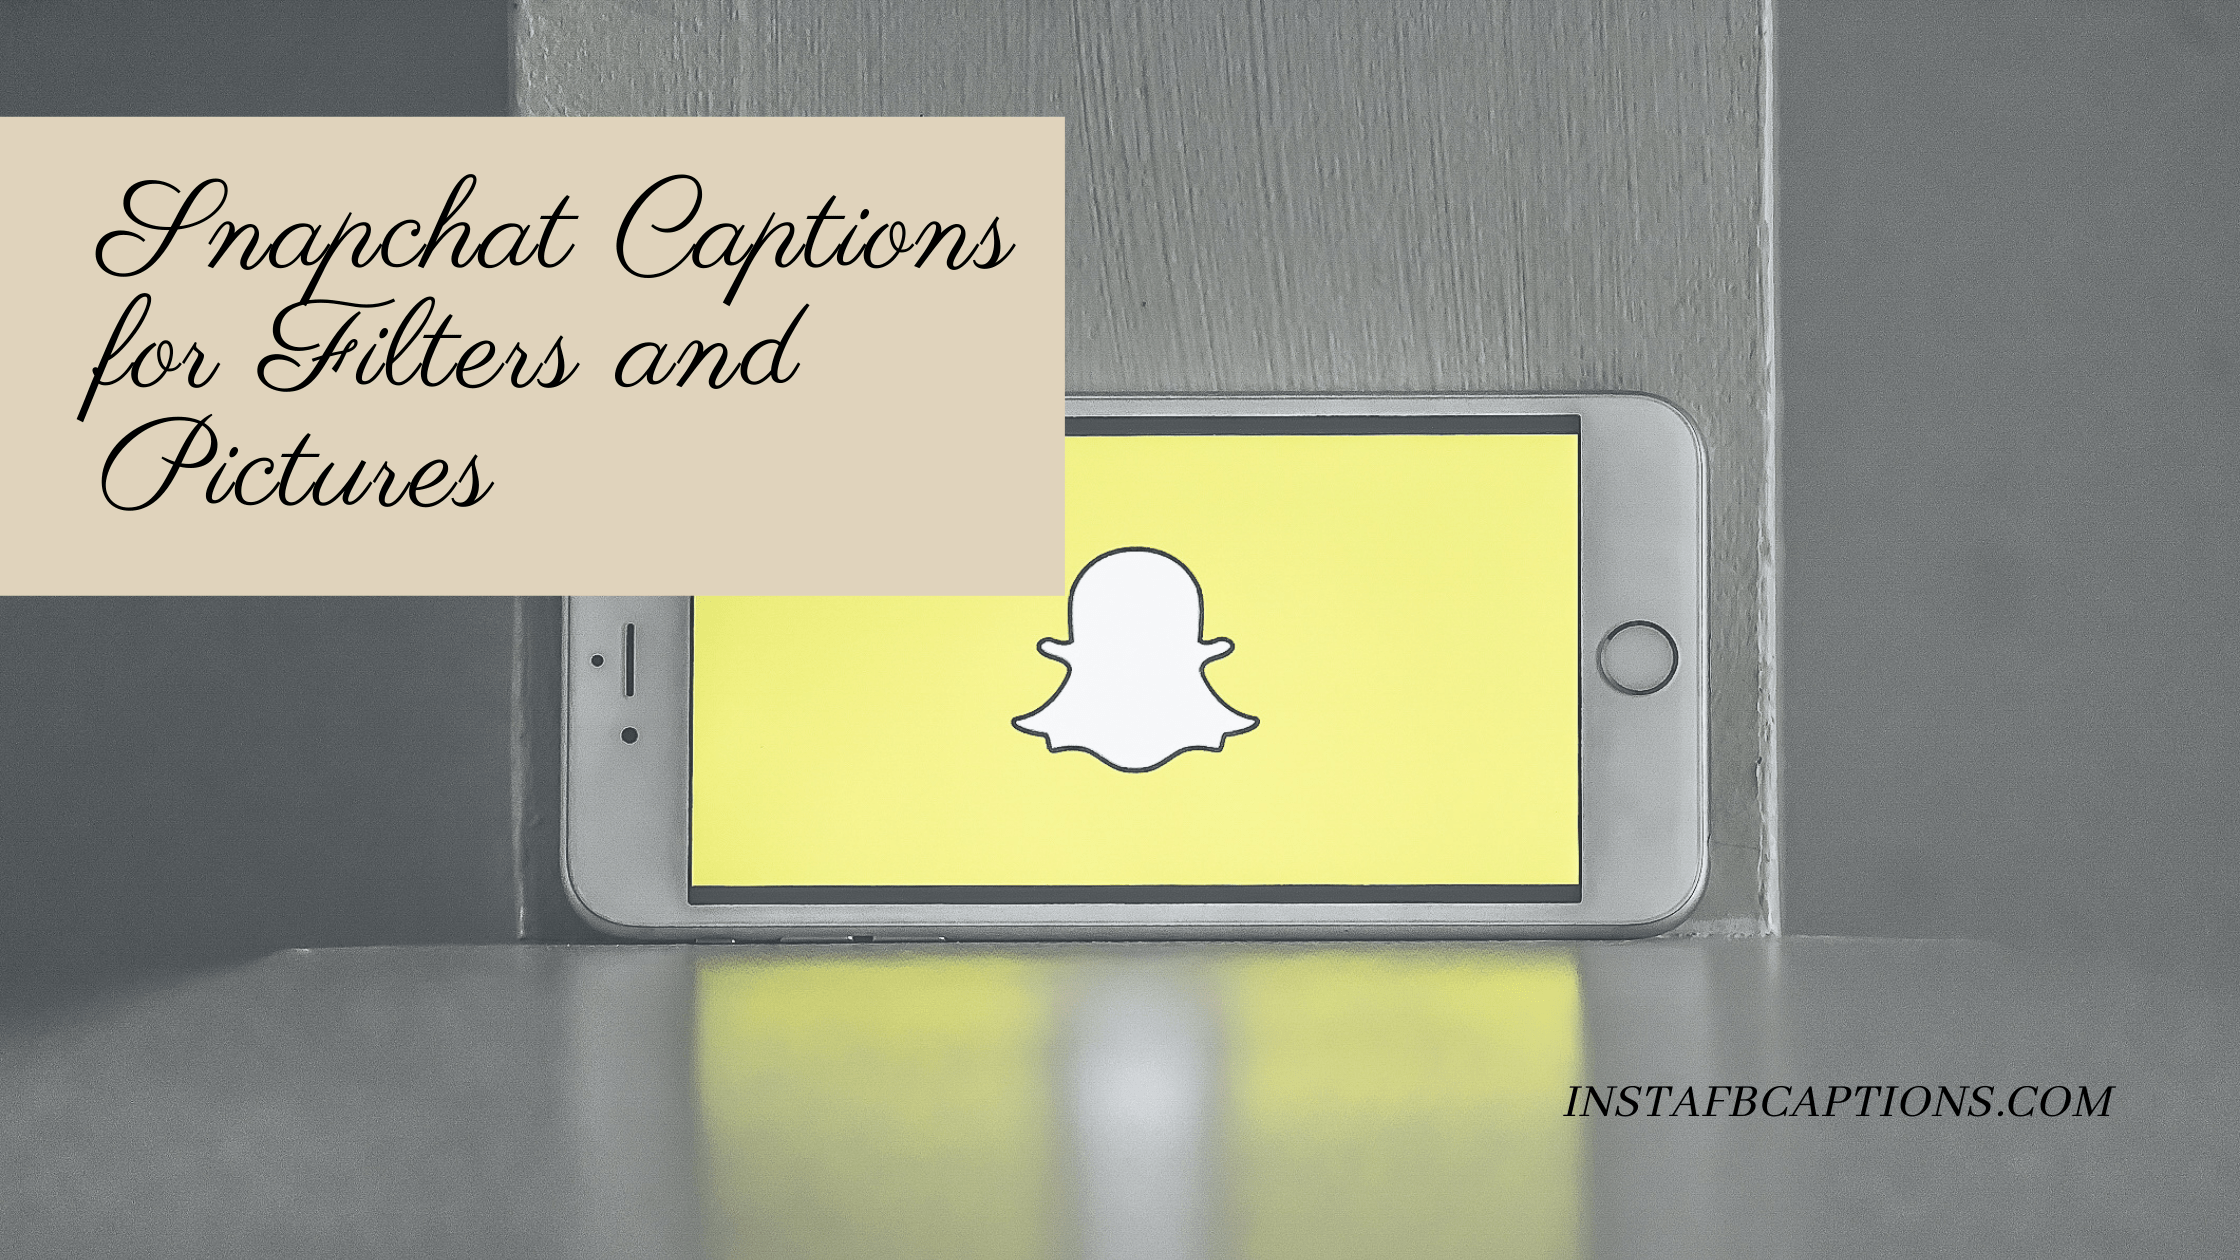 Snapchat Captions For Filters And Pictures  - Snapchat Captions for Filters and Pictures - 154 Snapchat Captions for Filters and Pictures in 2023